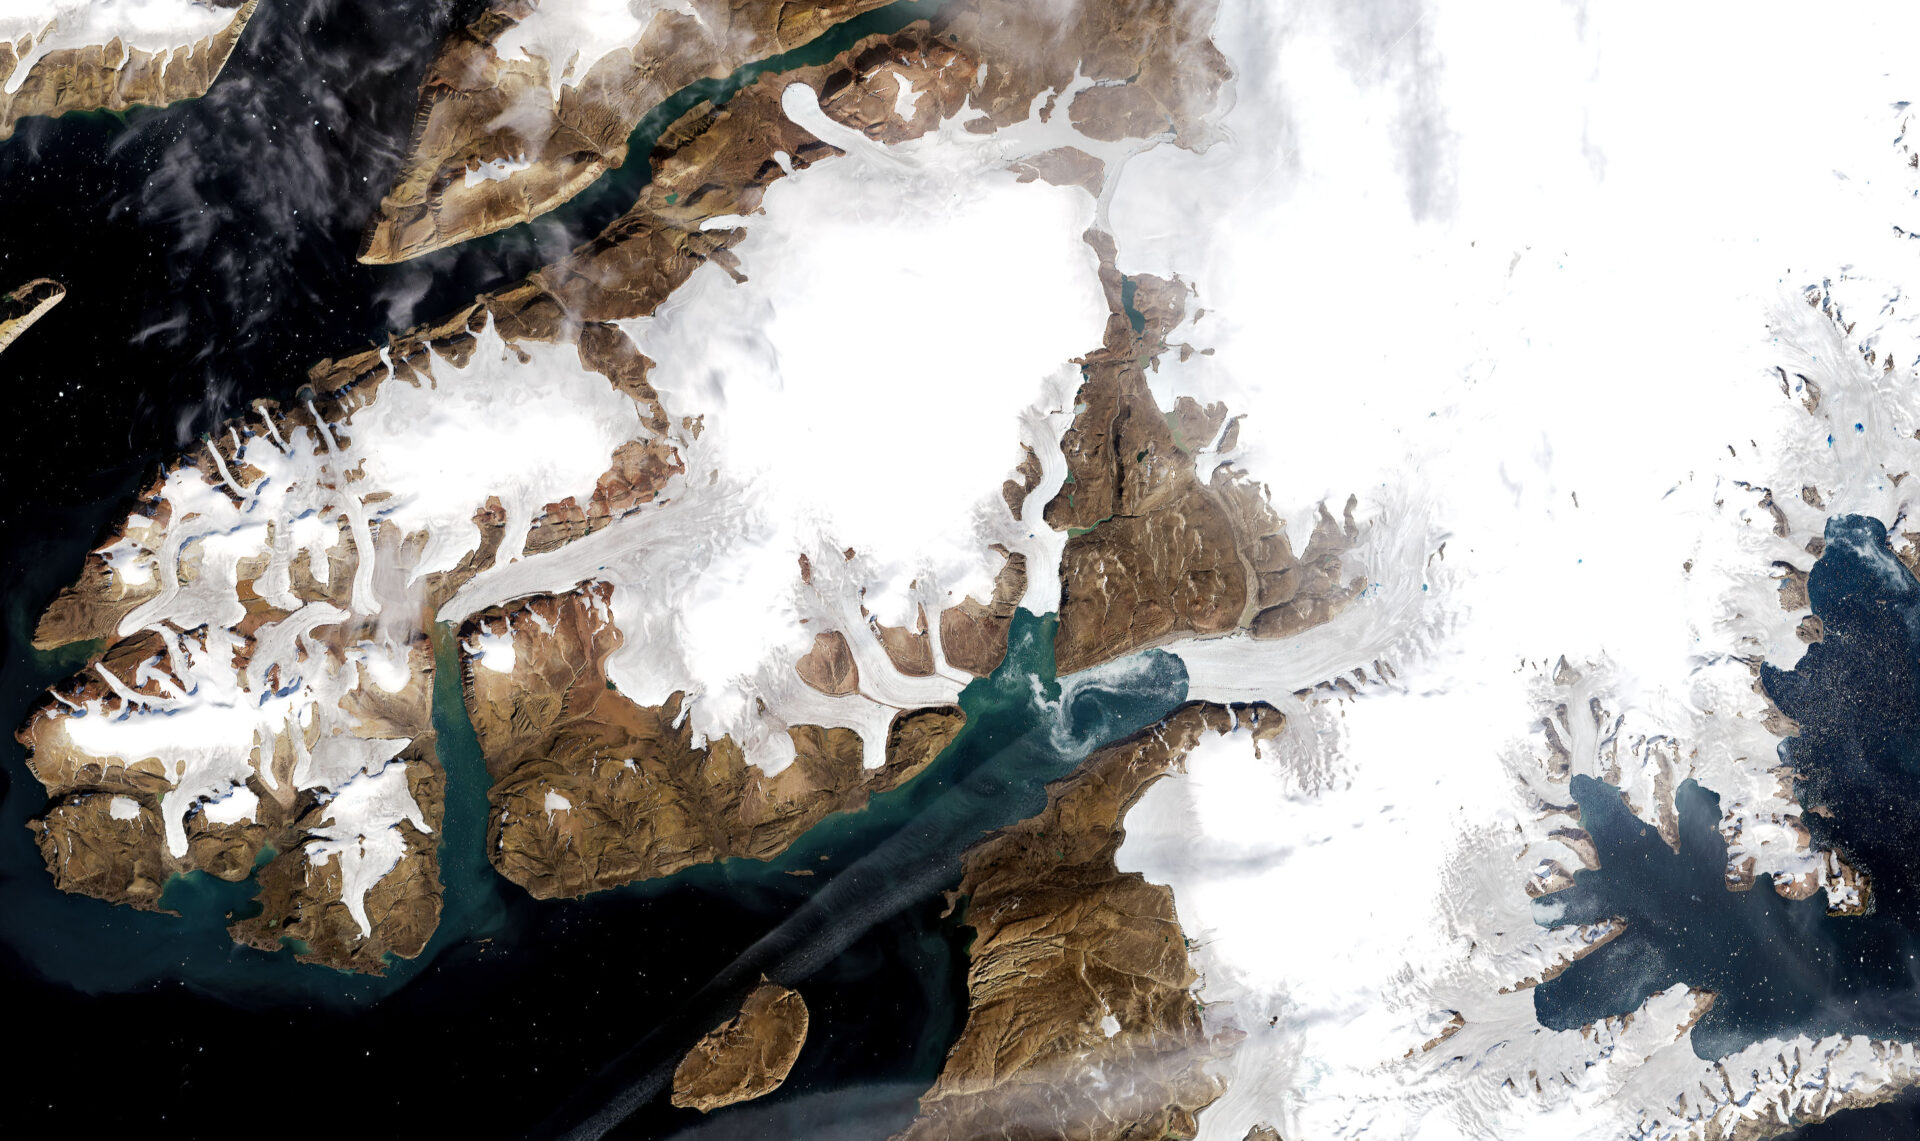 Satellites shows the retreat of Greenland glaciers